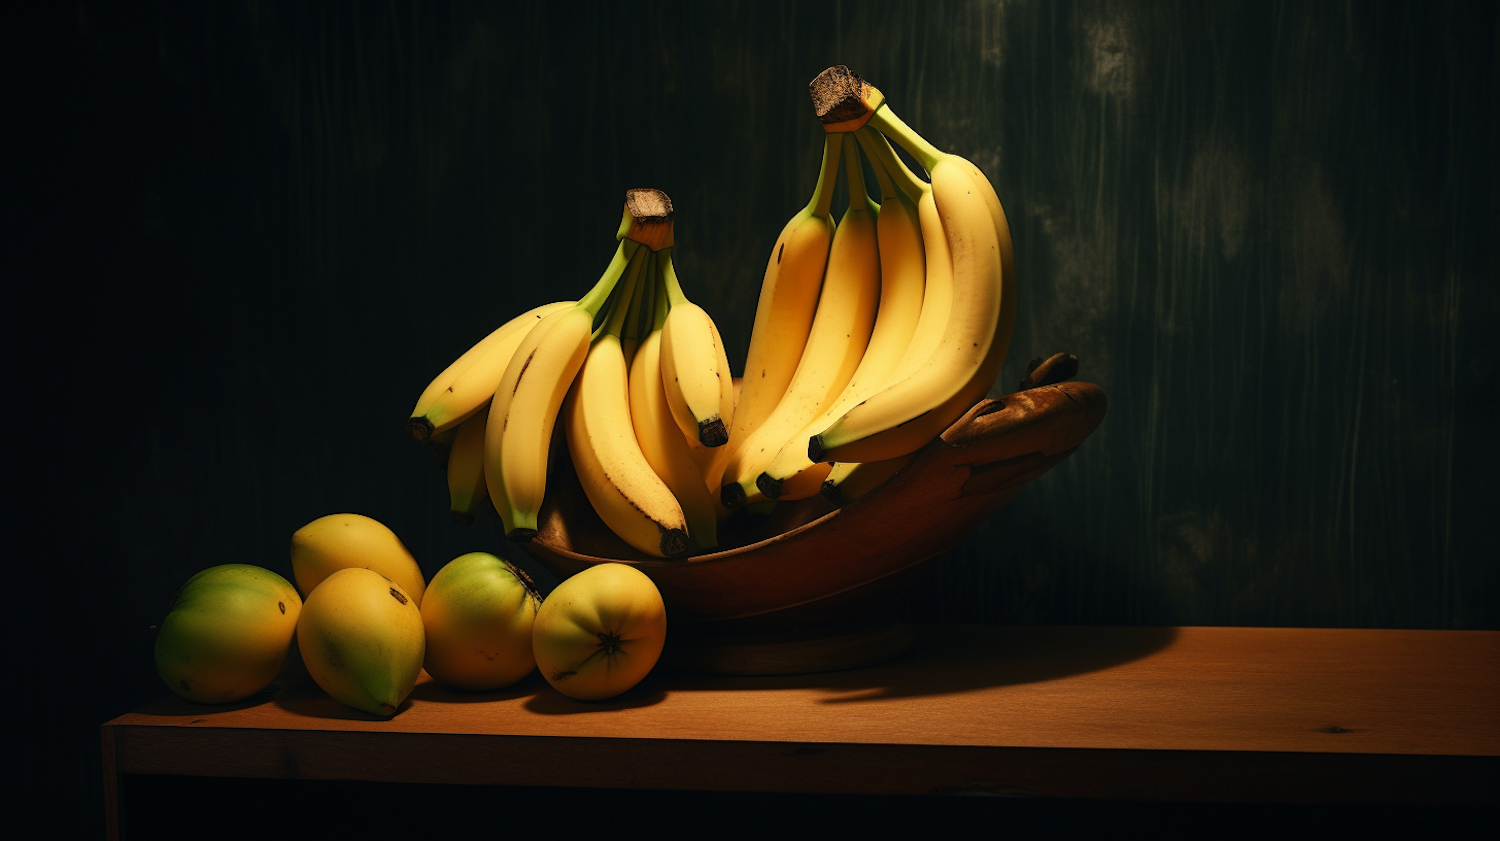 Classical Fruit Still Life with Bananas and Apples